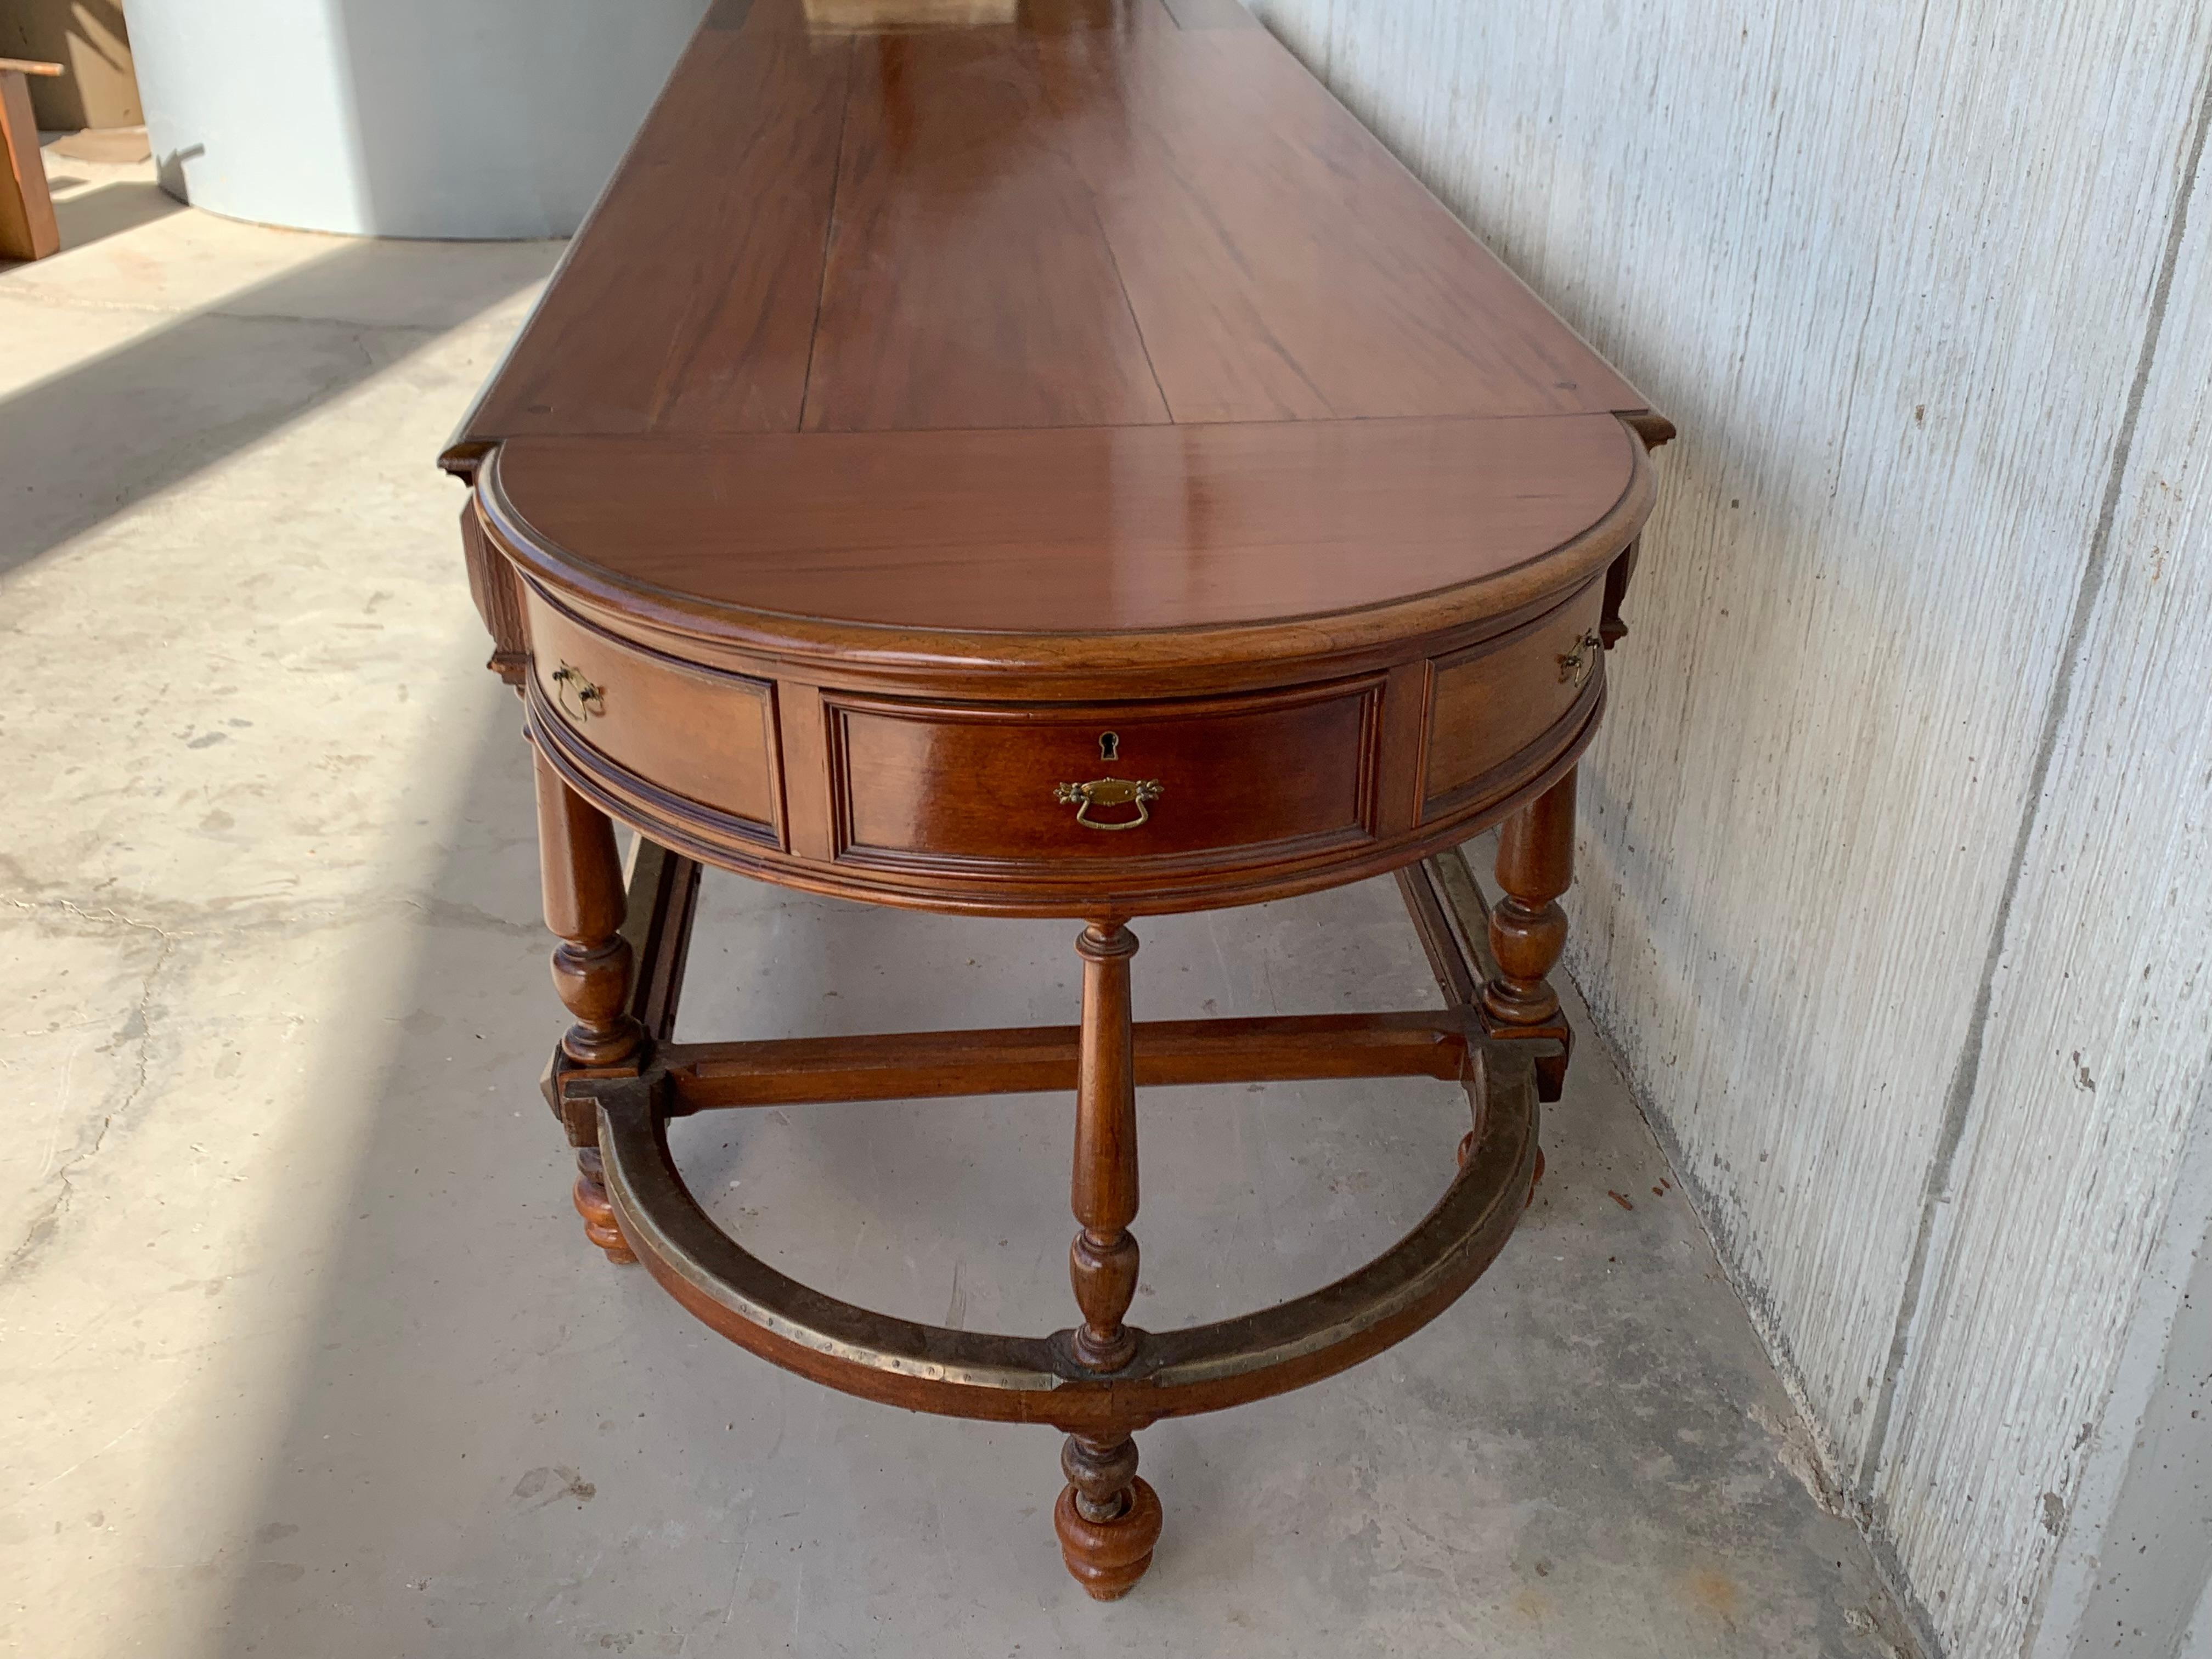 12 Foot Oval Center Table with Drawers in Both Sides, 20th Century In Good Condition For Sale In Miami, FL